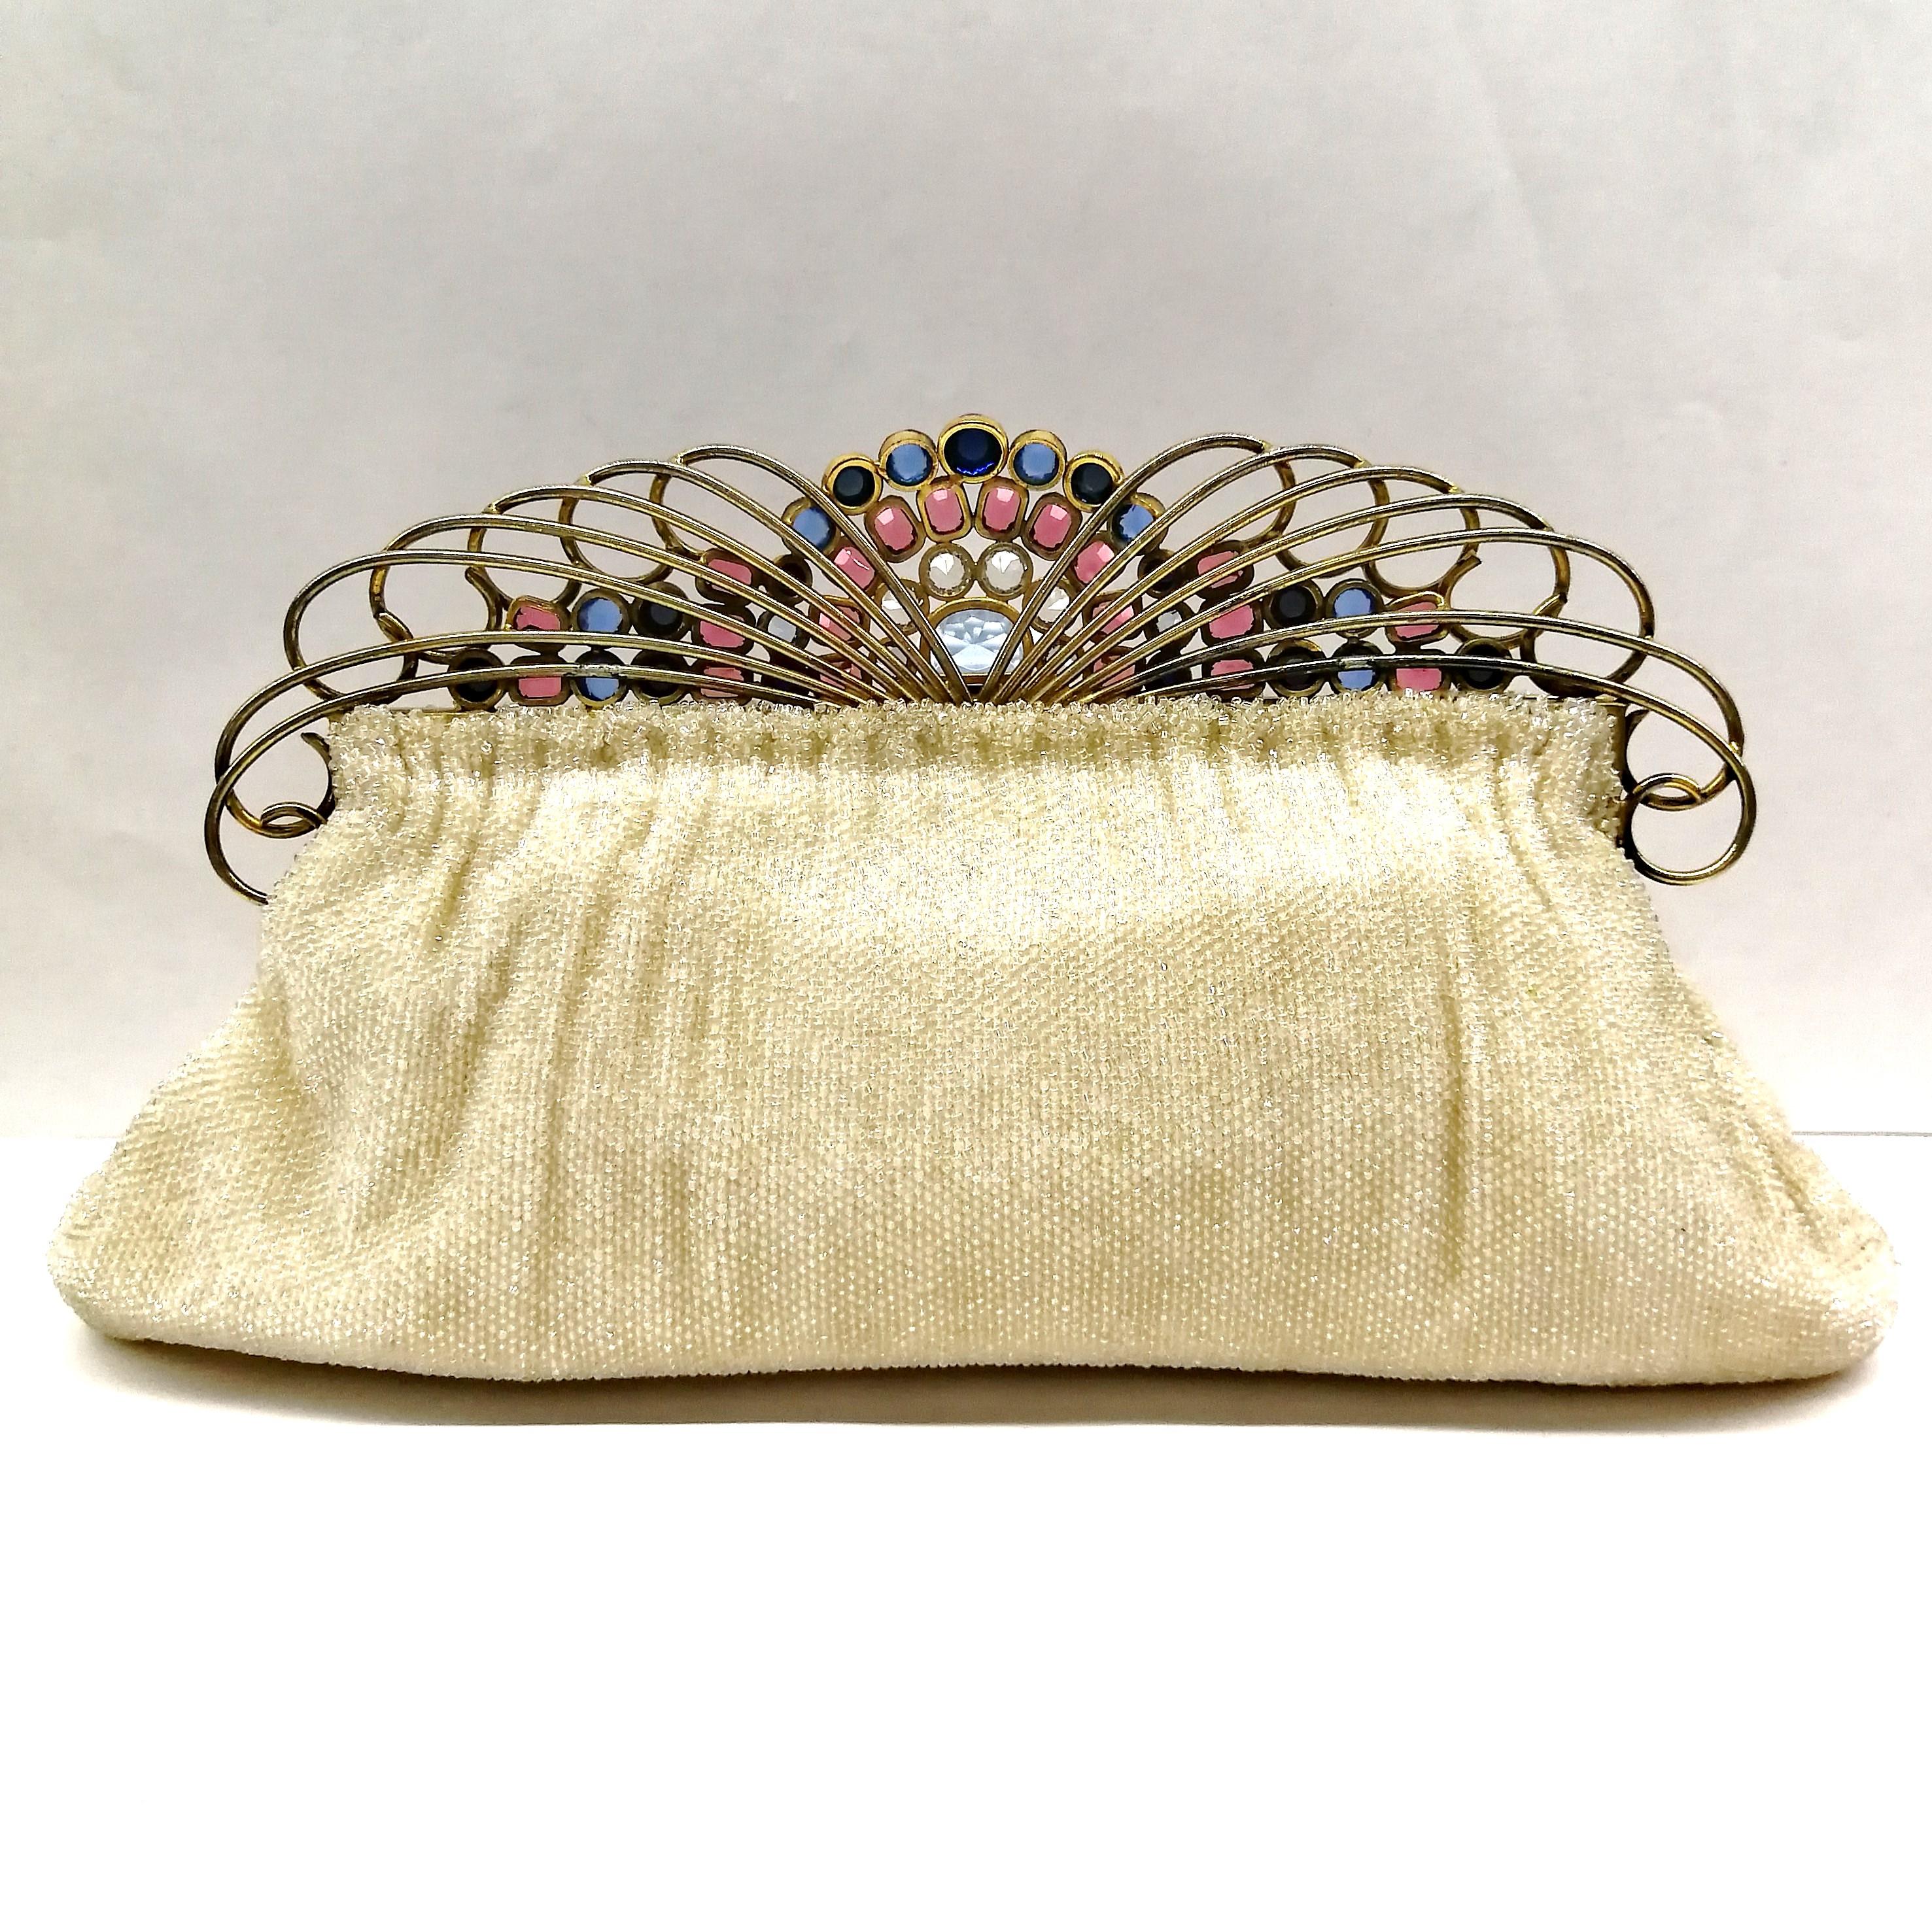 This rare and iconic clutch bag, in the realm of vintage and collectable handbags, made for Saks Fifth Avenue by Josef, is crowned with an exuberant and baroque frame/clasp, made by the celebrated jewellery manufacturer Hobe, set with sapphire glass